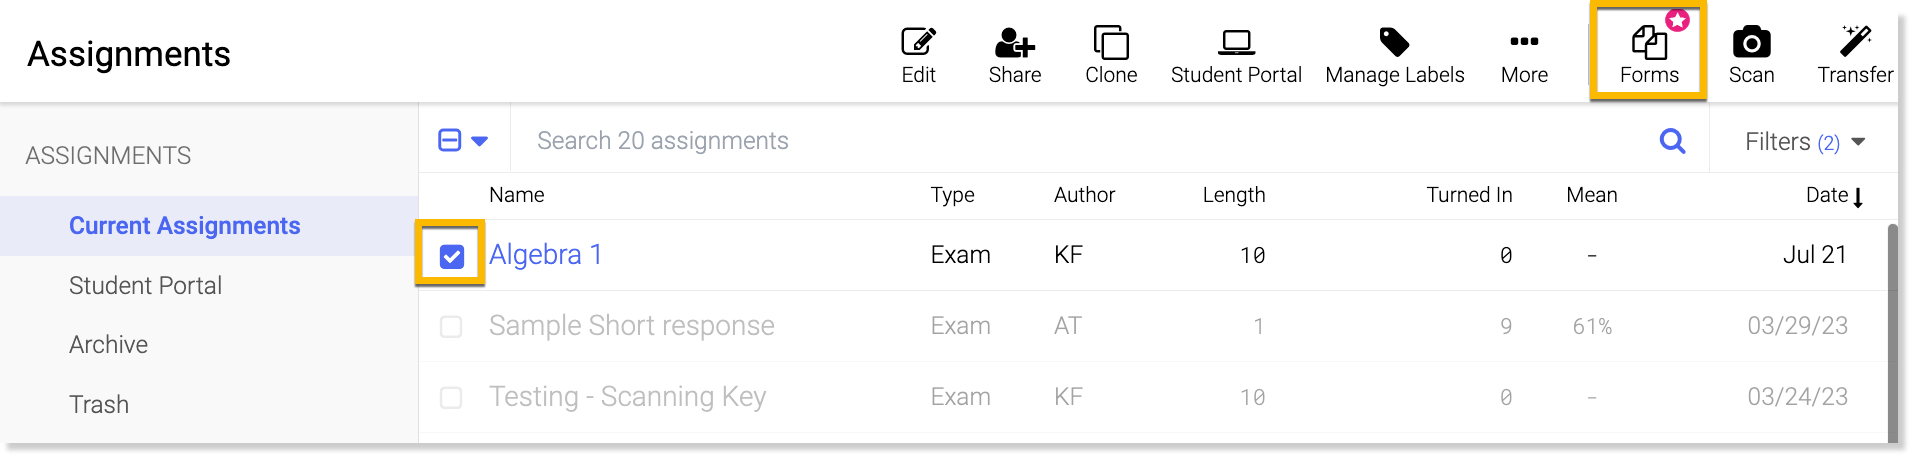 Assignment - Forms Icon.png